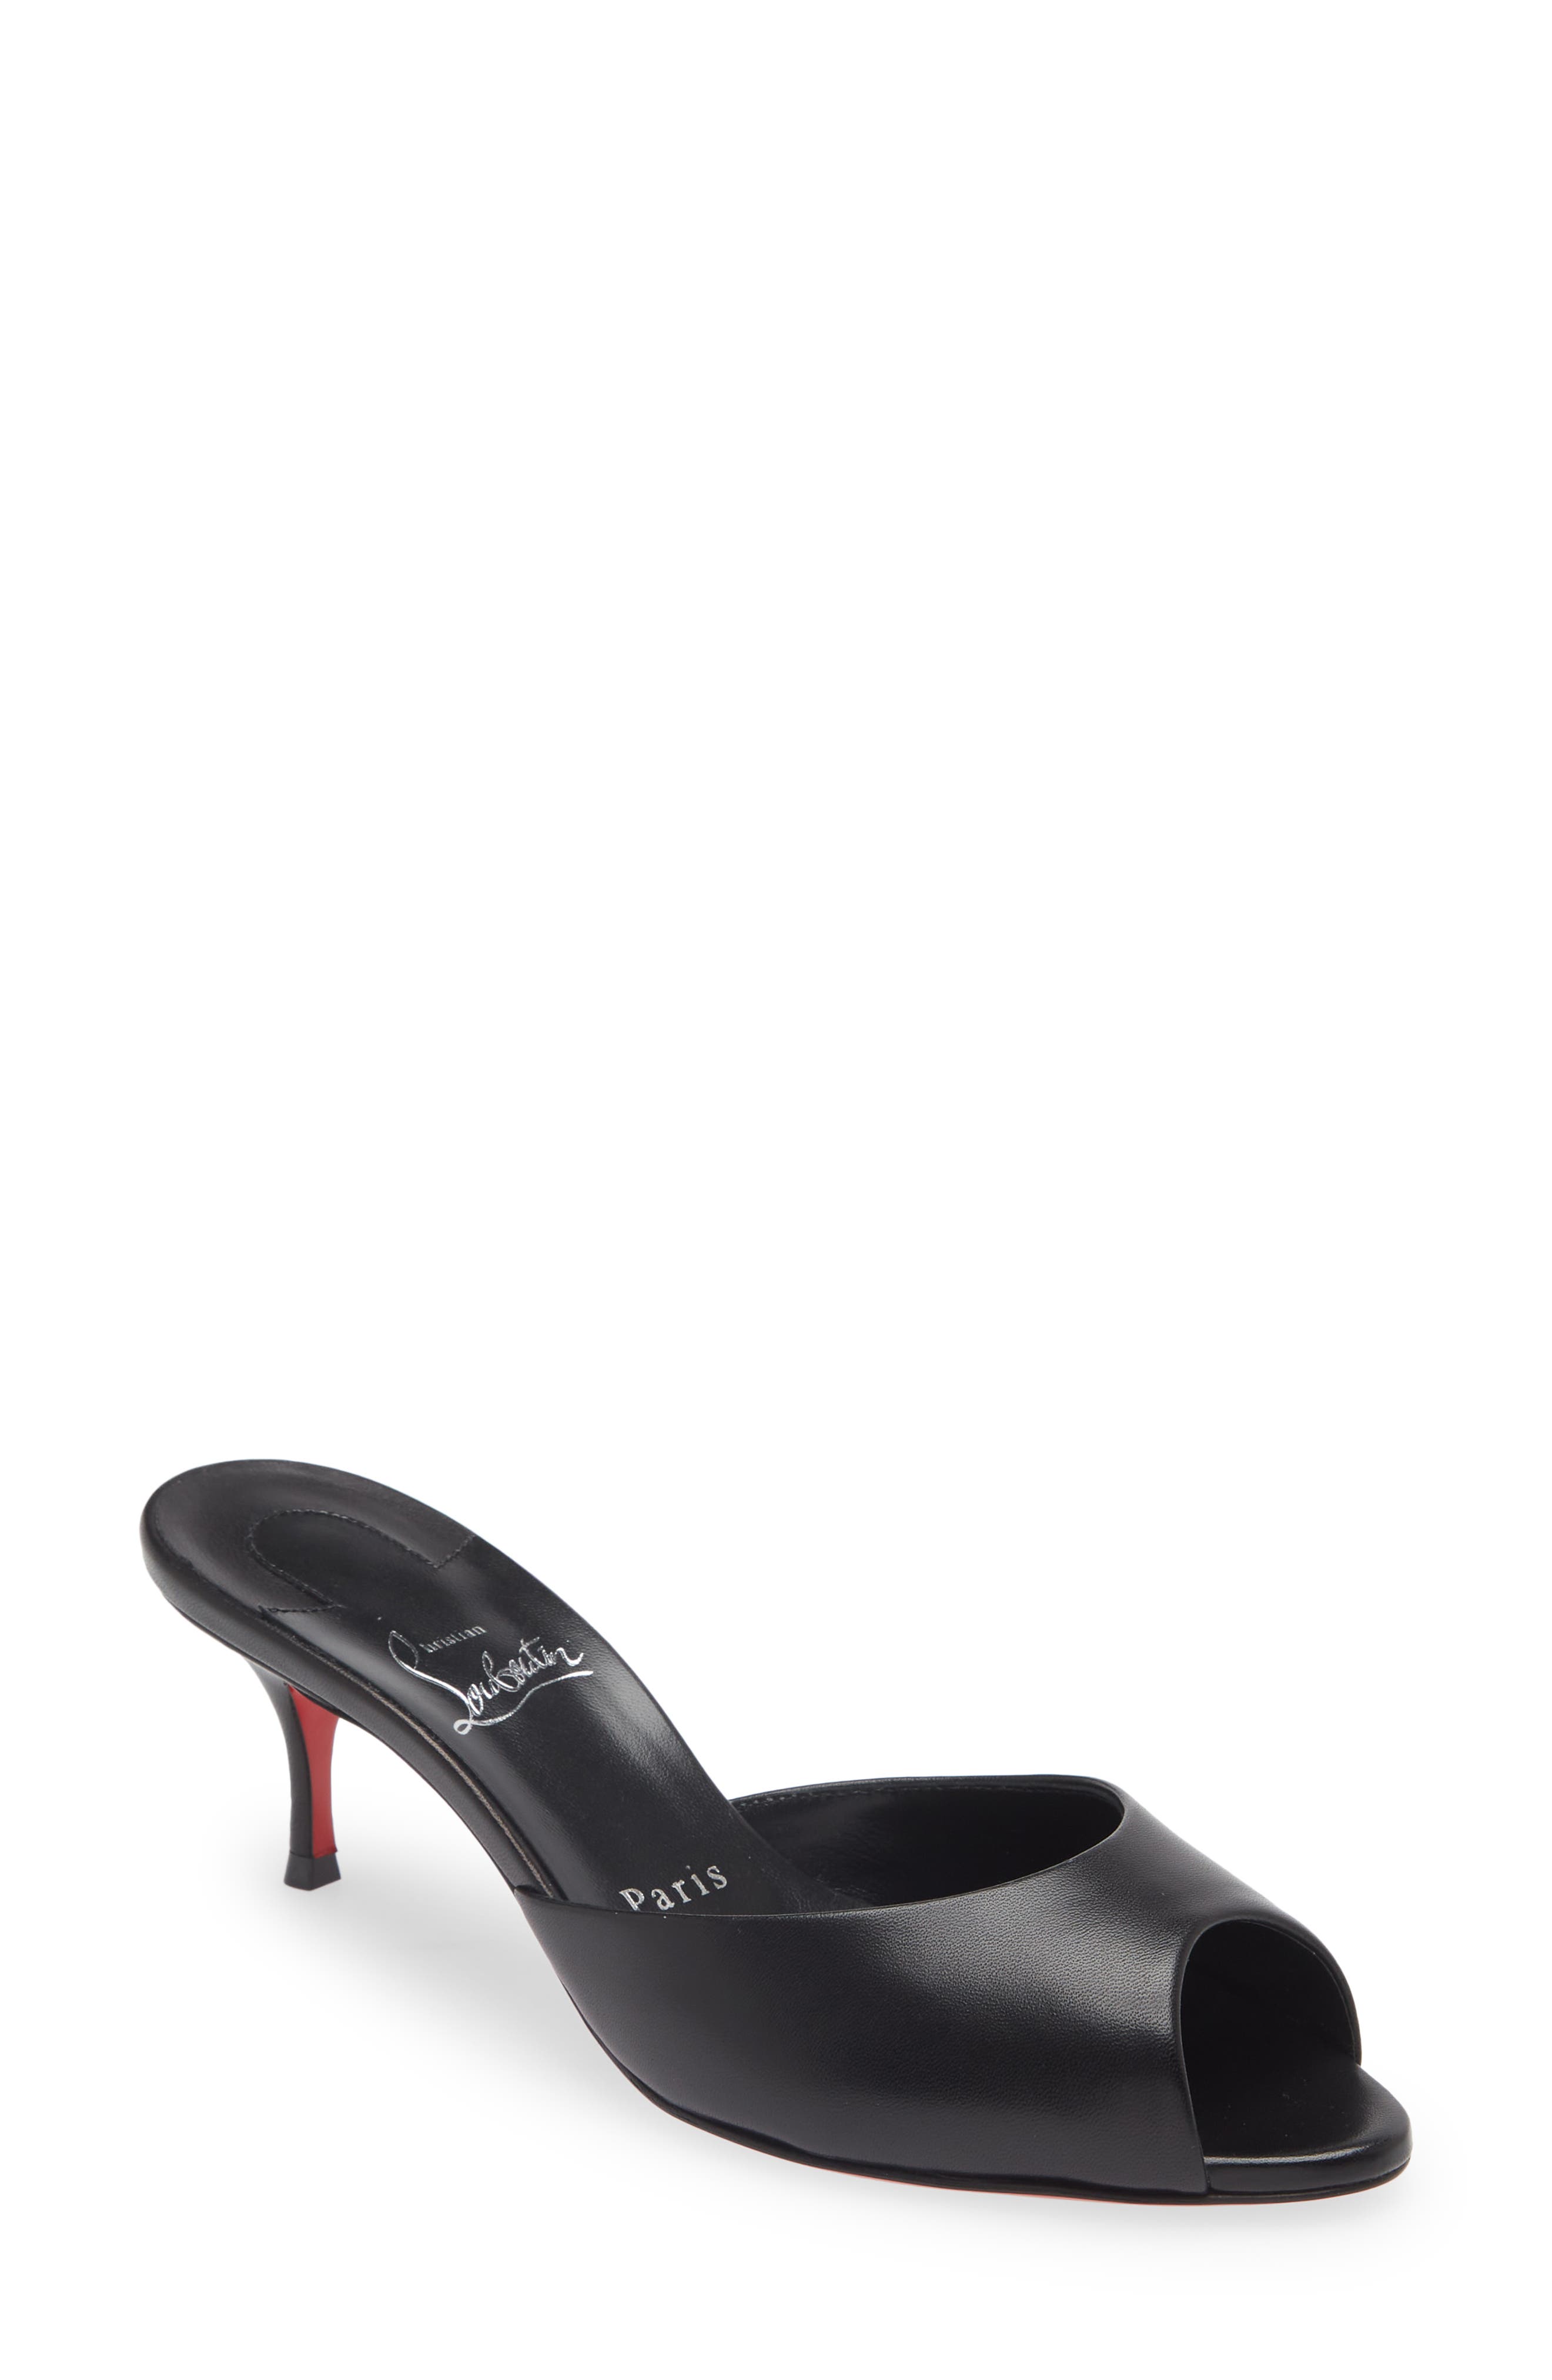 Women's Christian Louboutin Clothing, Shoes  Accessories Nordstrom